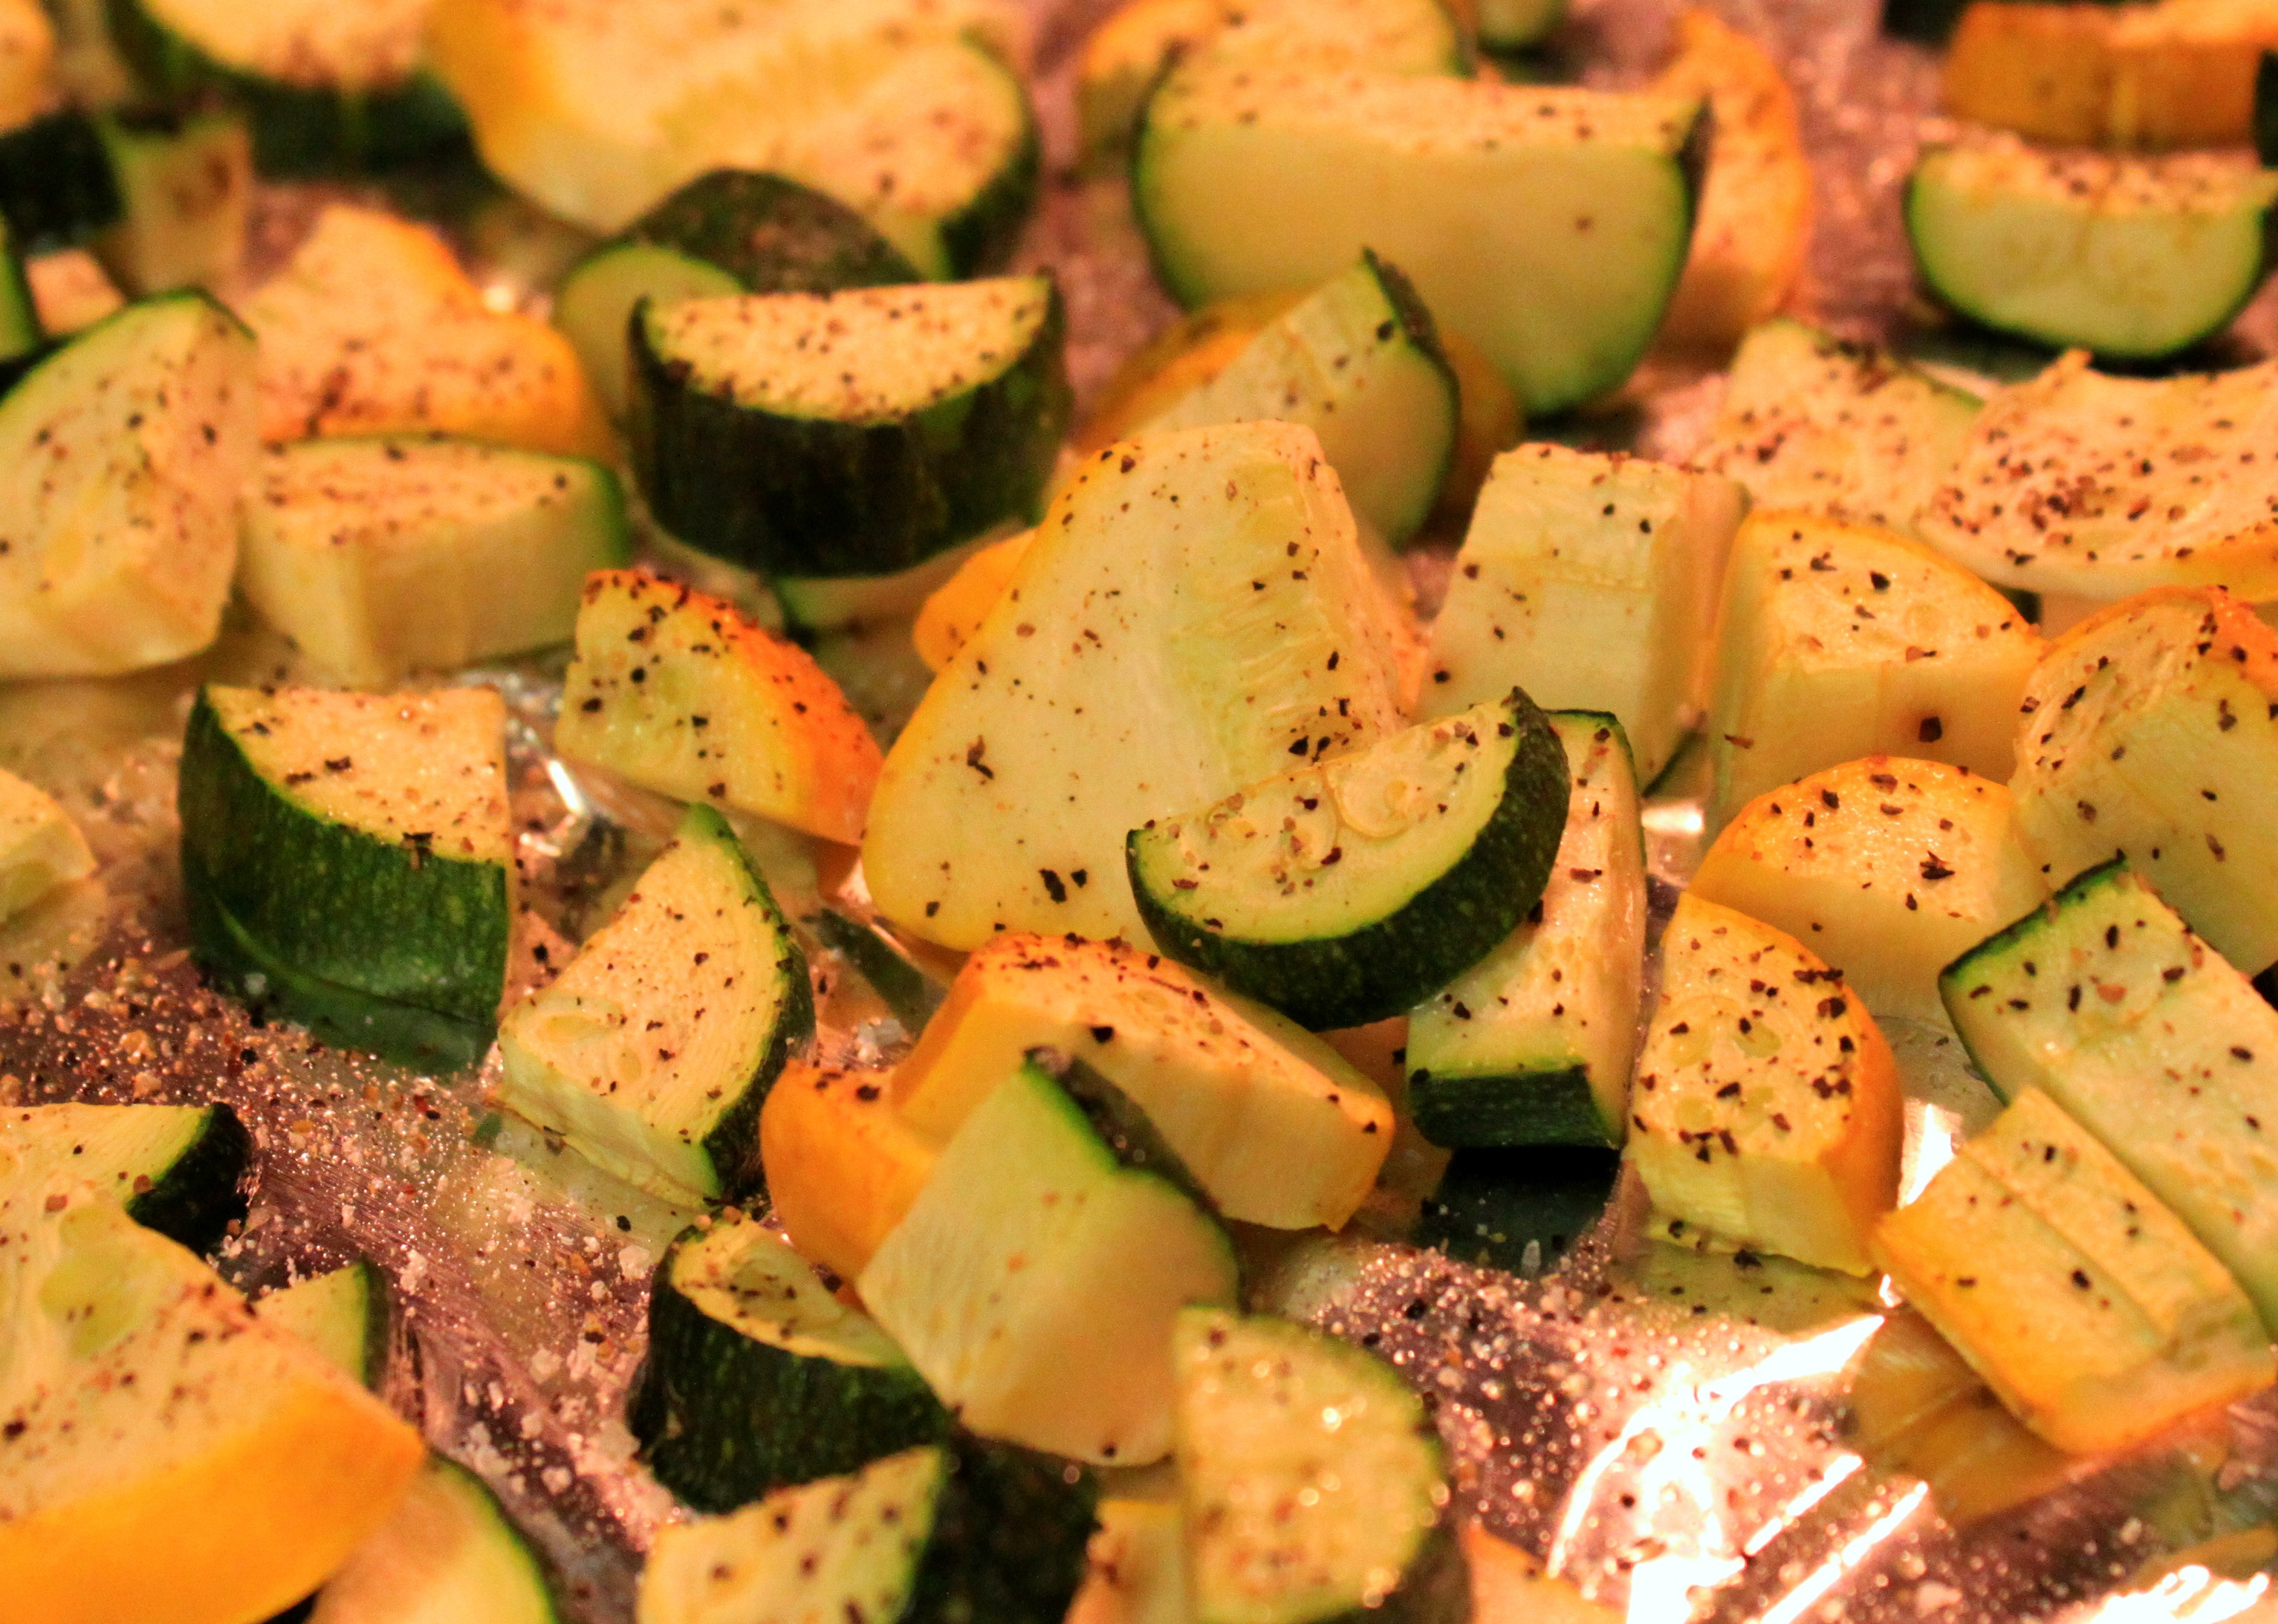 Healthy Yellow Squash Recipes
 Super Simple Recipe Roasted Summer Squash The Picky Eater